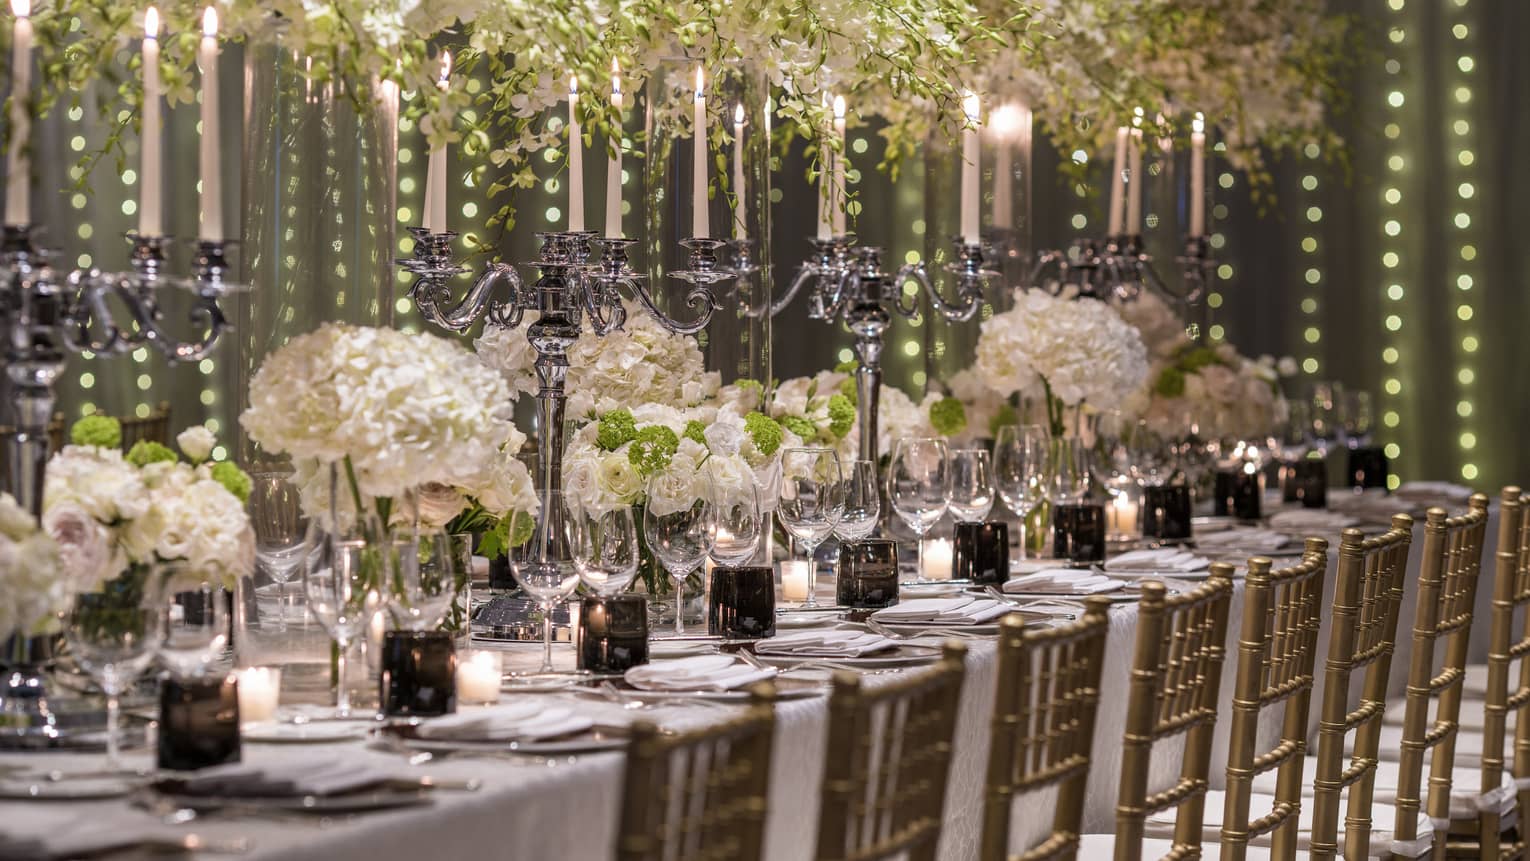 Elaborate white flowers and candelabras serve as the centerpiece of a dining arrangement